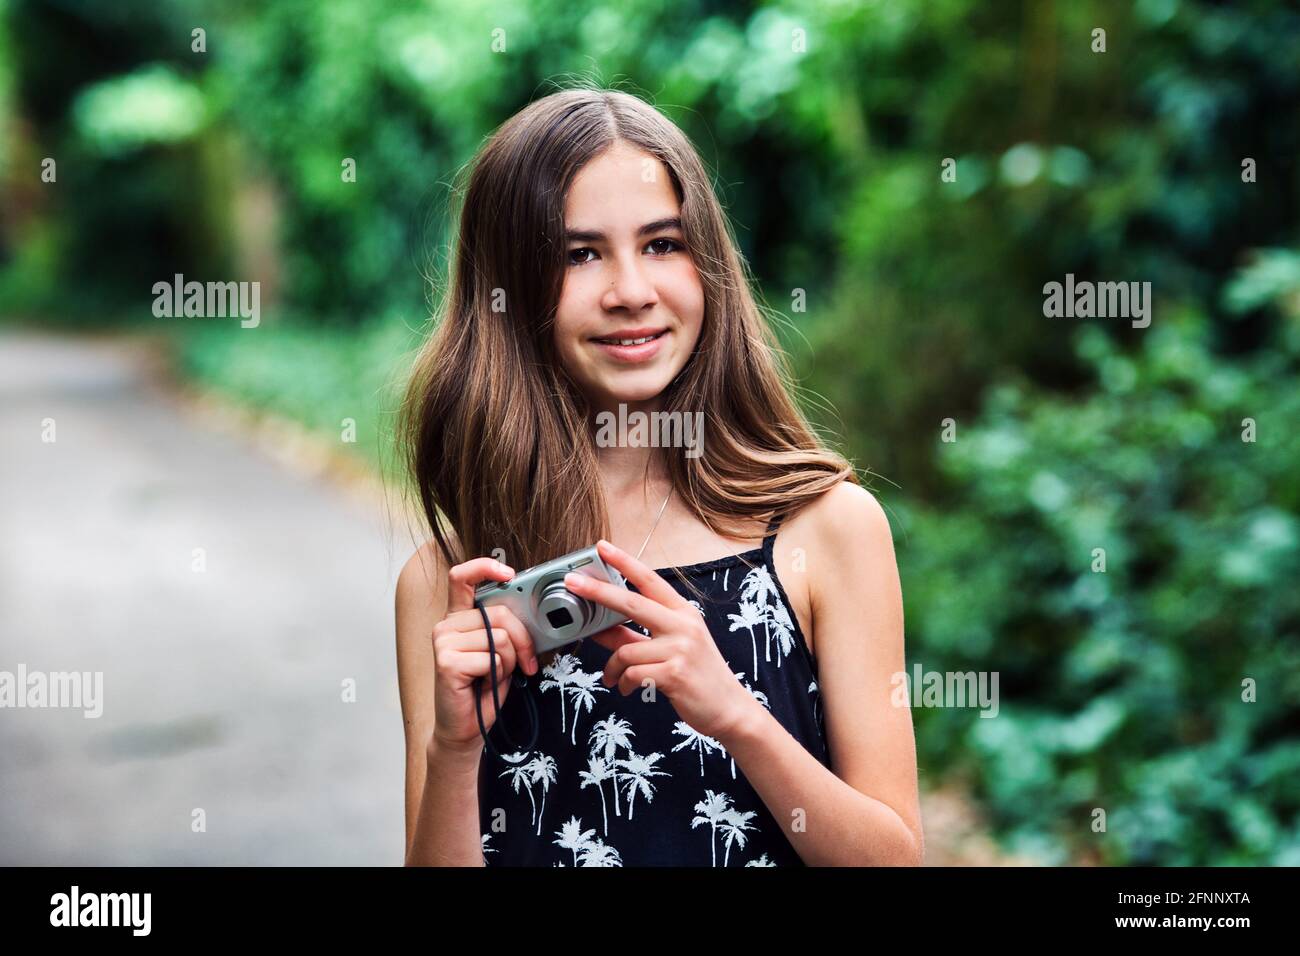 young girl holding camera at outside Stock Photo